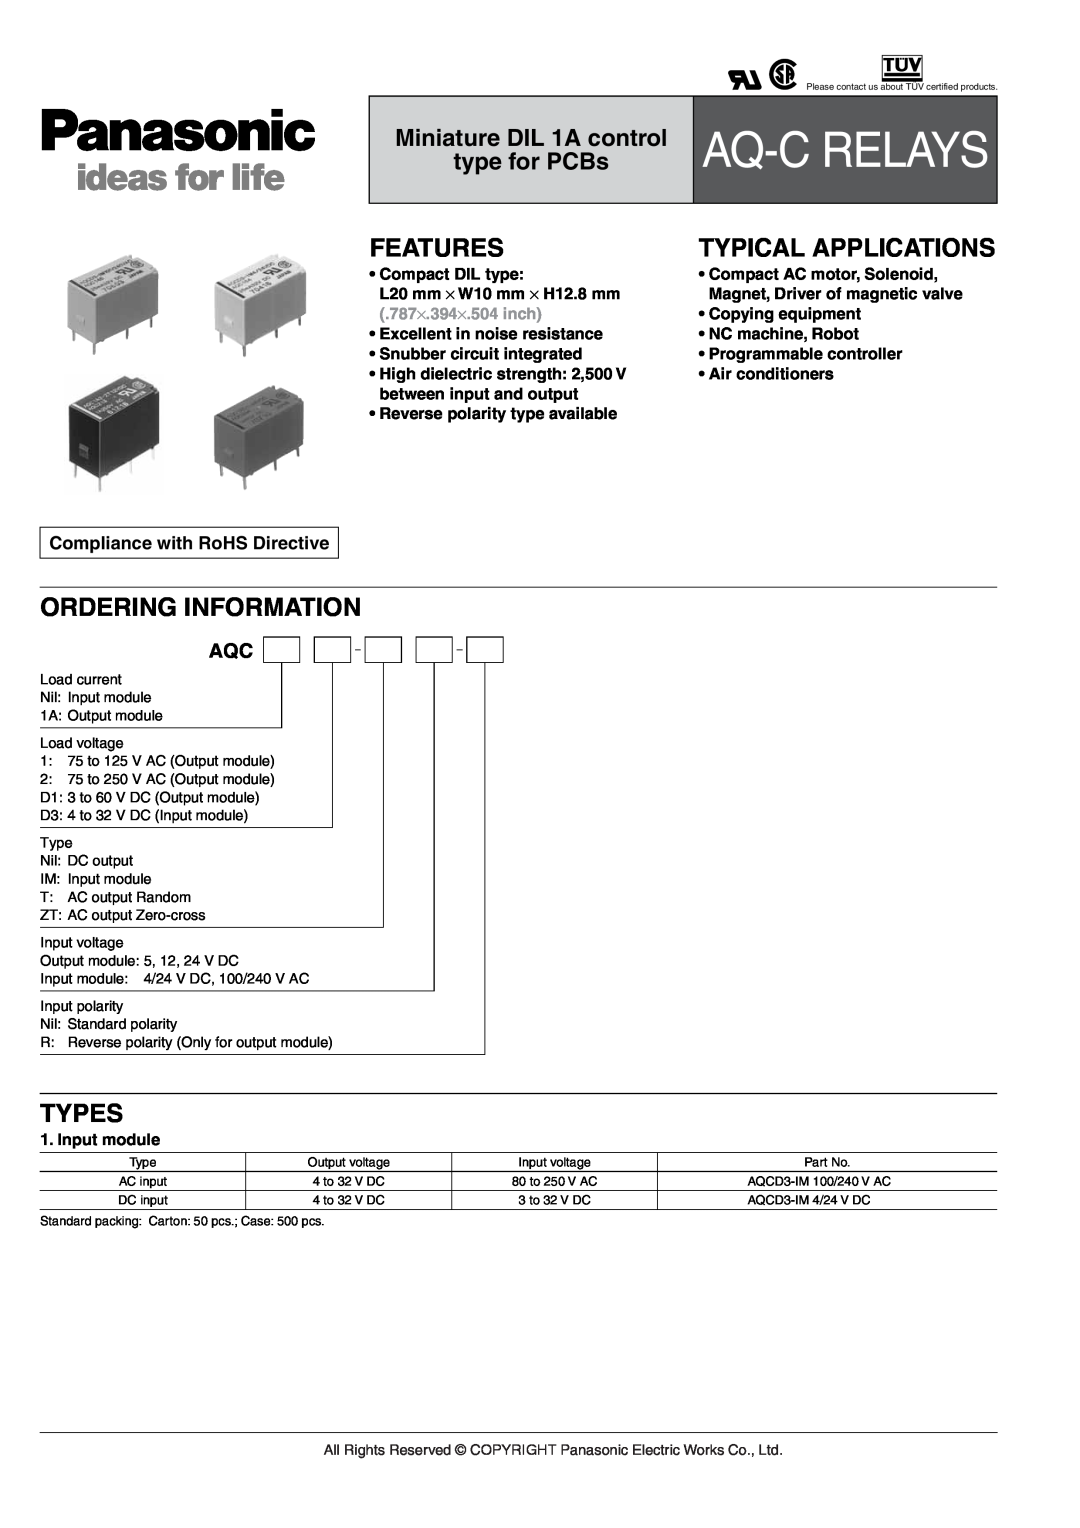 Panasonic AQ-C Relays manual Aq-C, Features, Ordering Information, Types, Compact DIL type L20 mm ⋅ W10 mm ⋅ H12.8 mm 